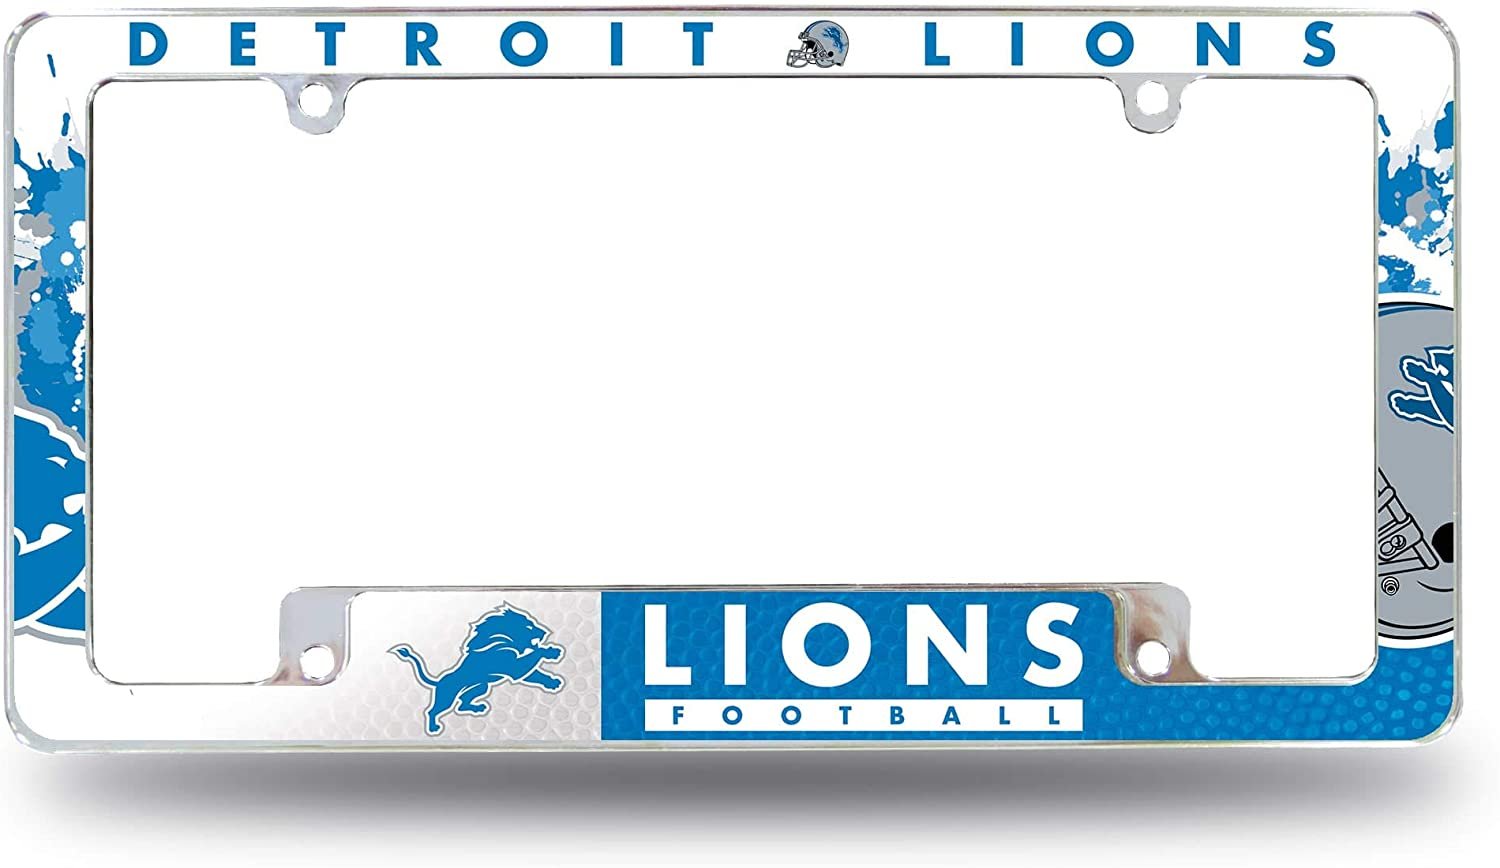 Detroit Lions Metal License Plate Frame Tag Cover All Over Design EZ View